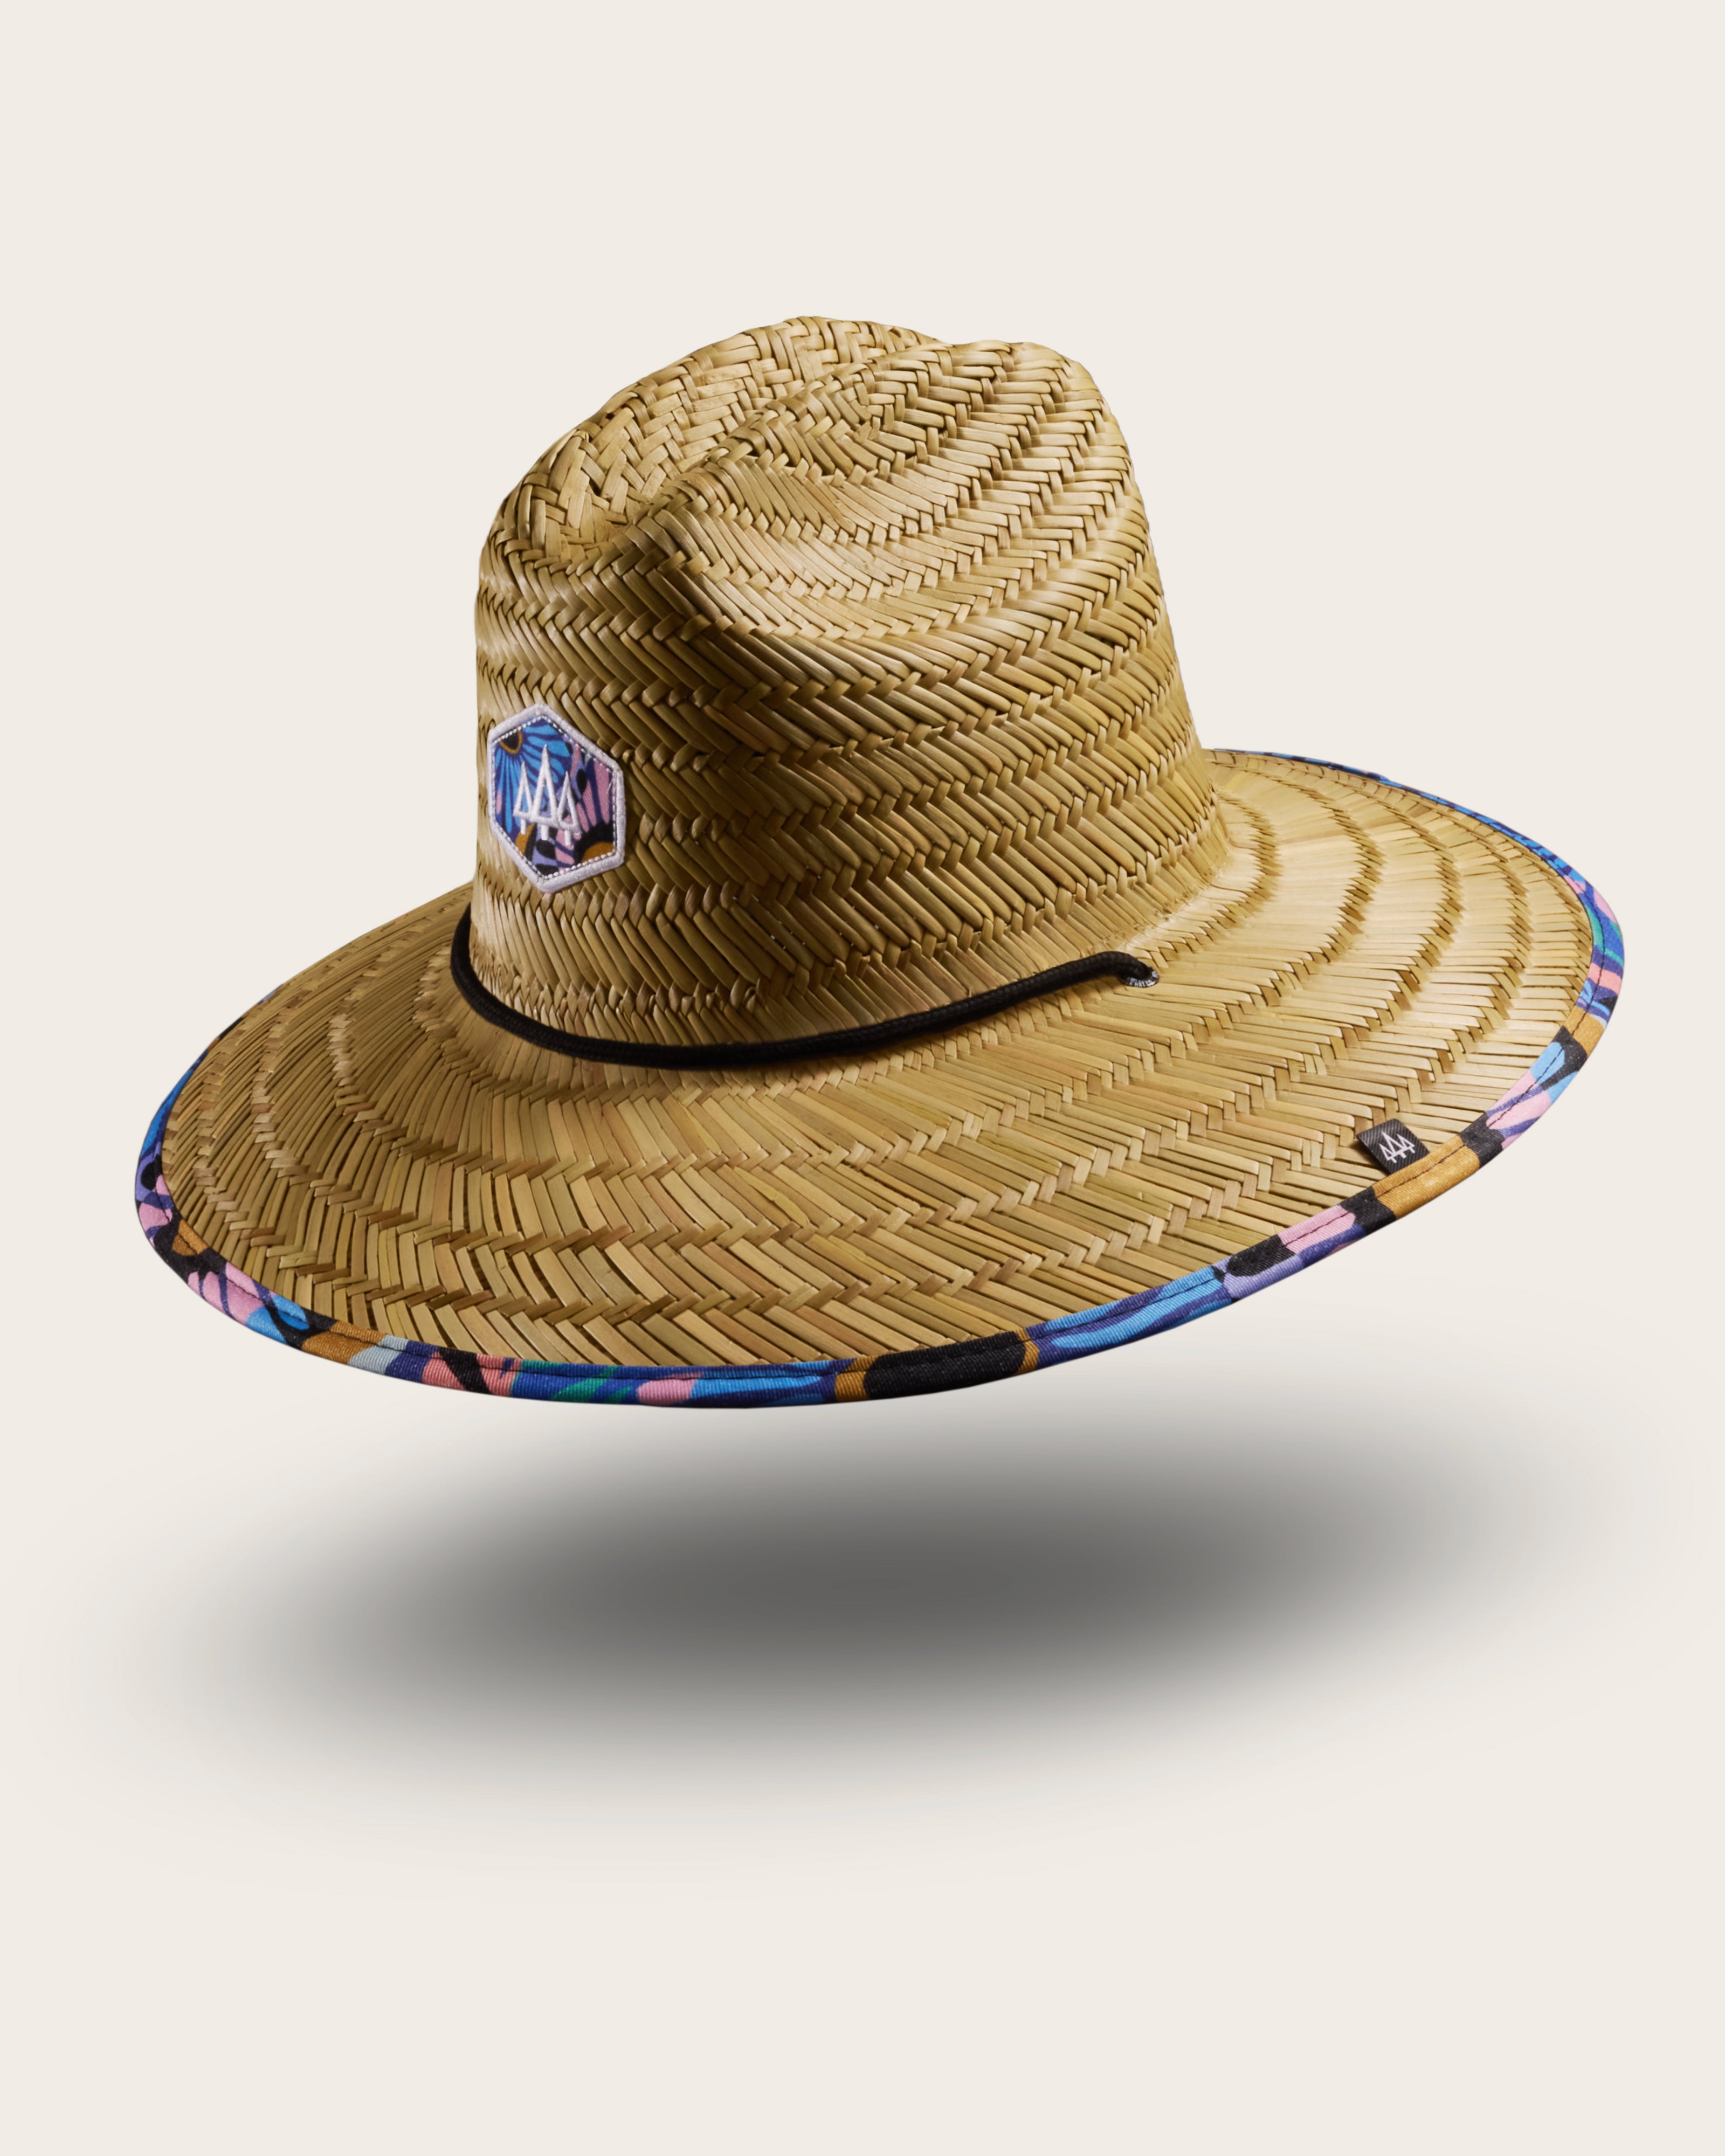 Hemlock Eden straw lifeguard hat with purple floral pattern with patch